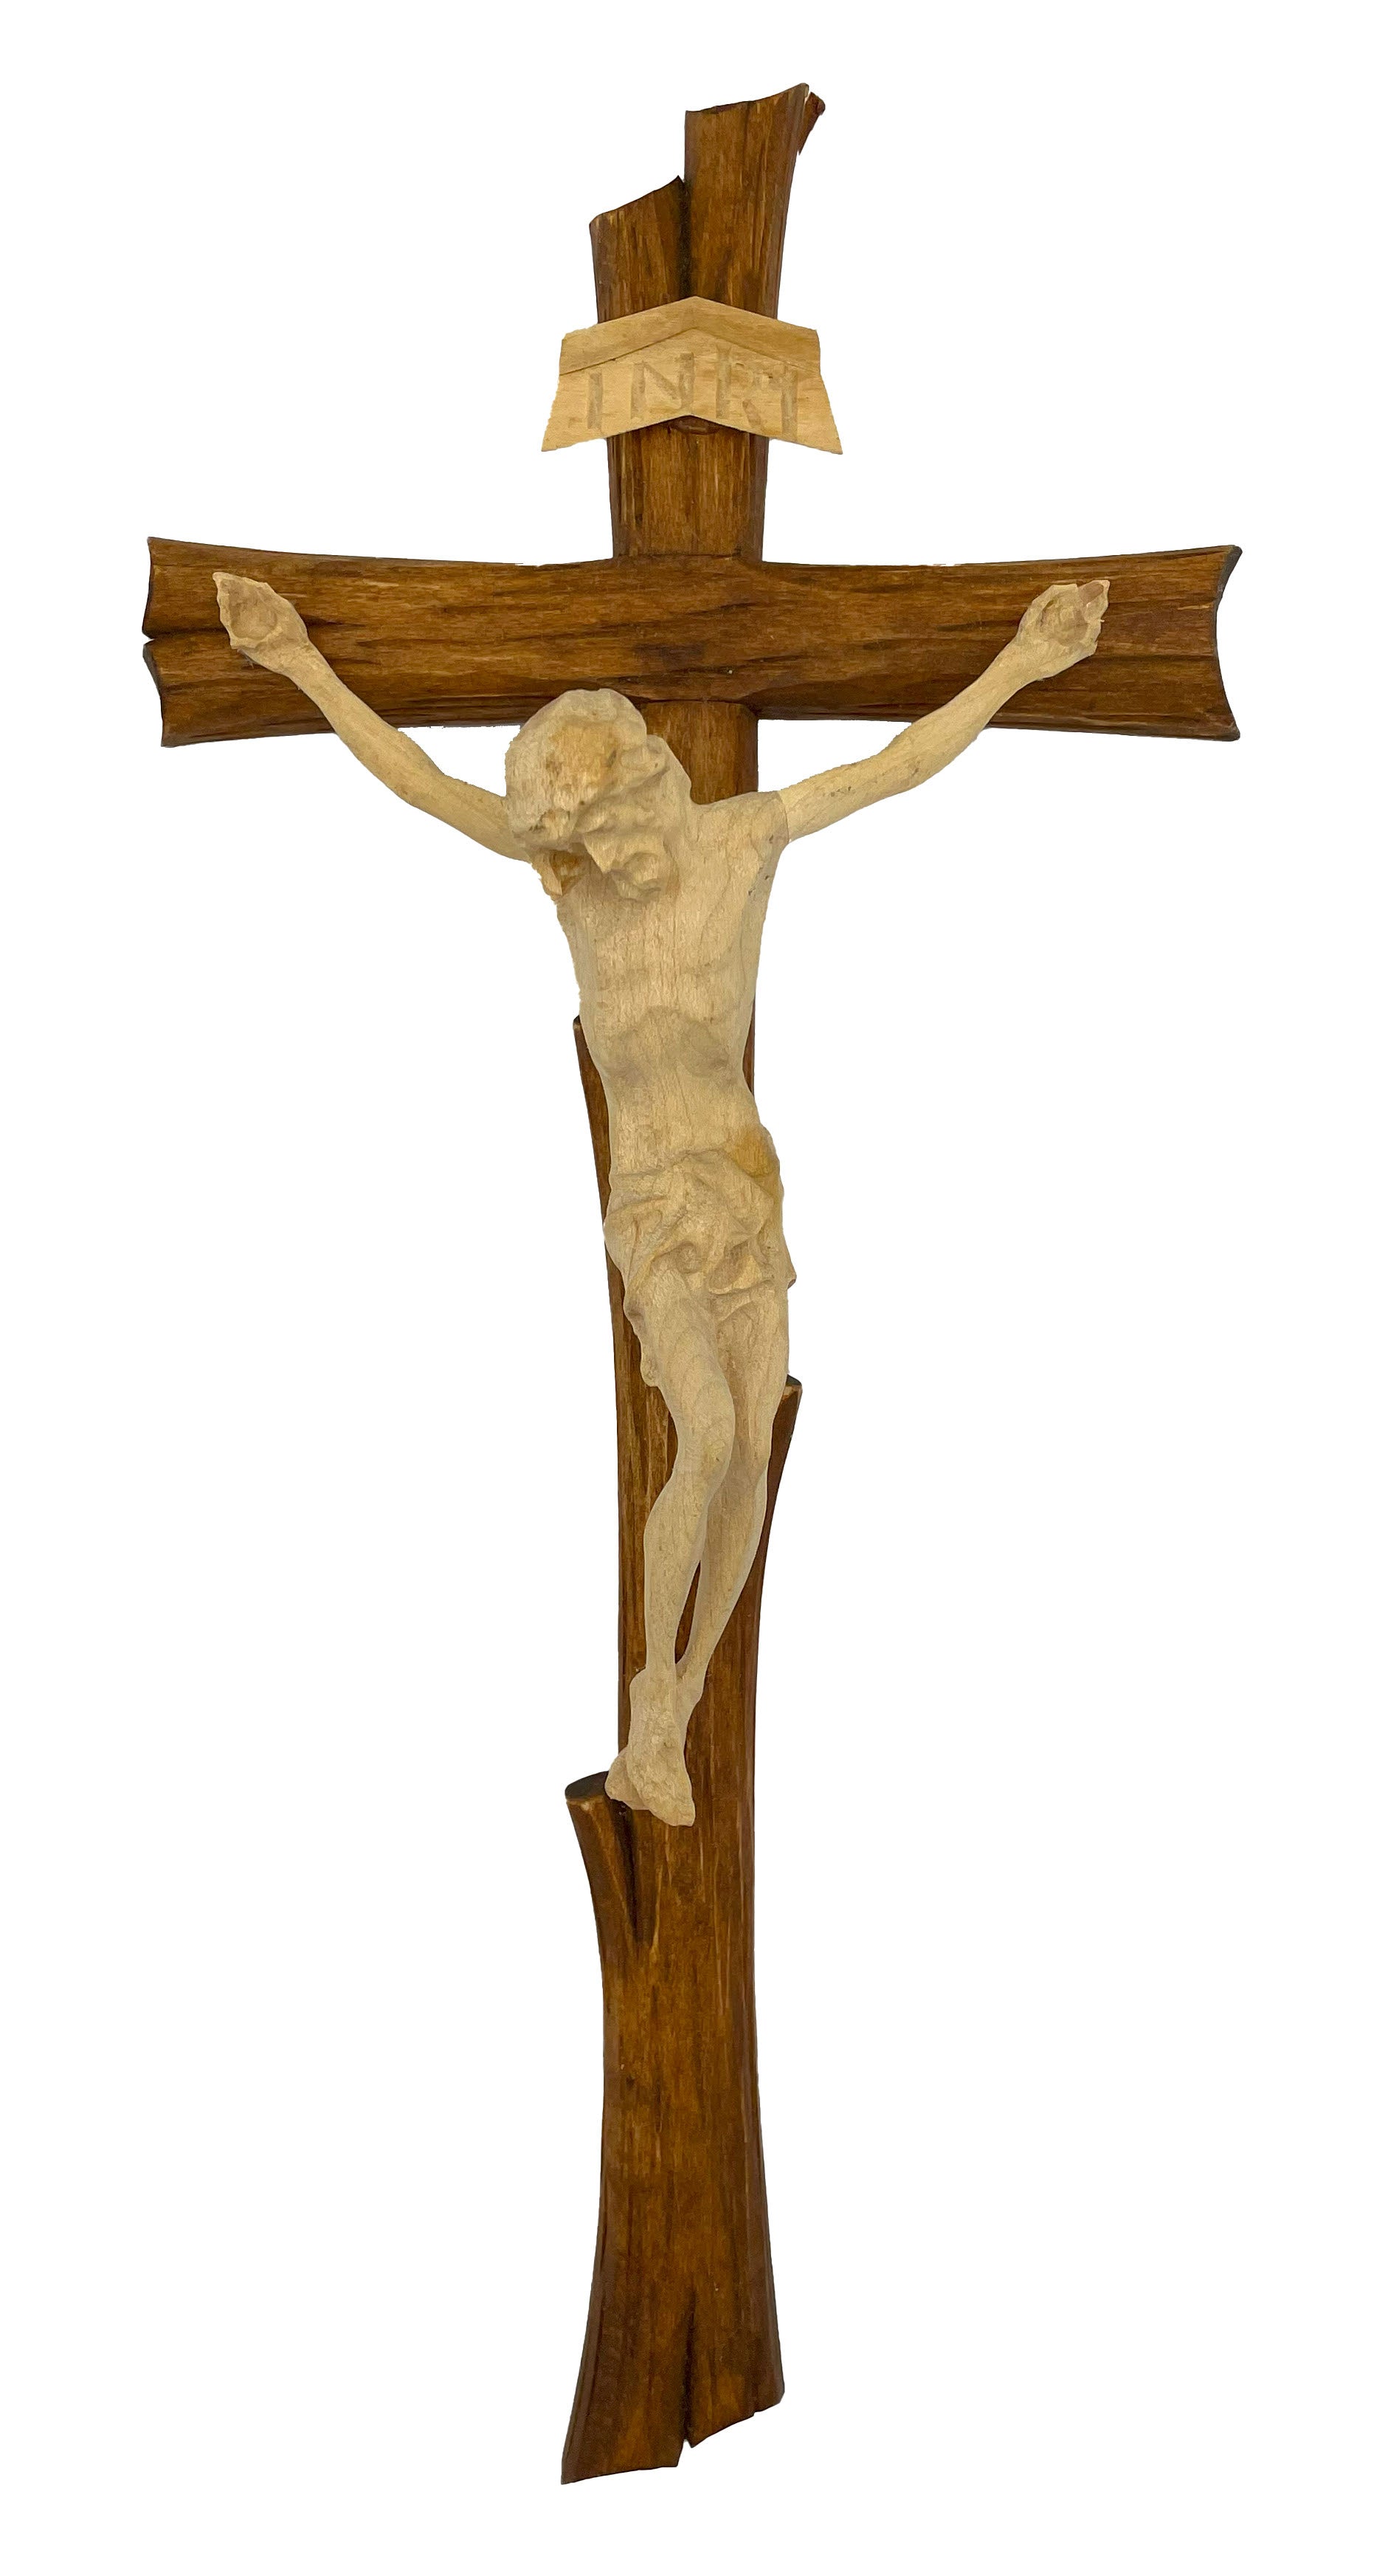 Wood Carved Crucifix - Natural Tree Cross with Jesus